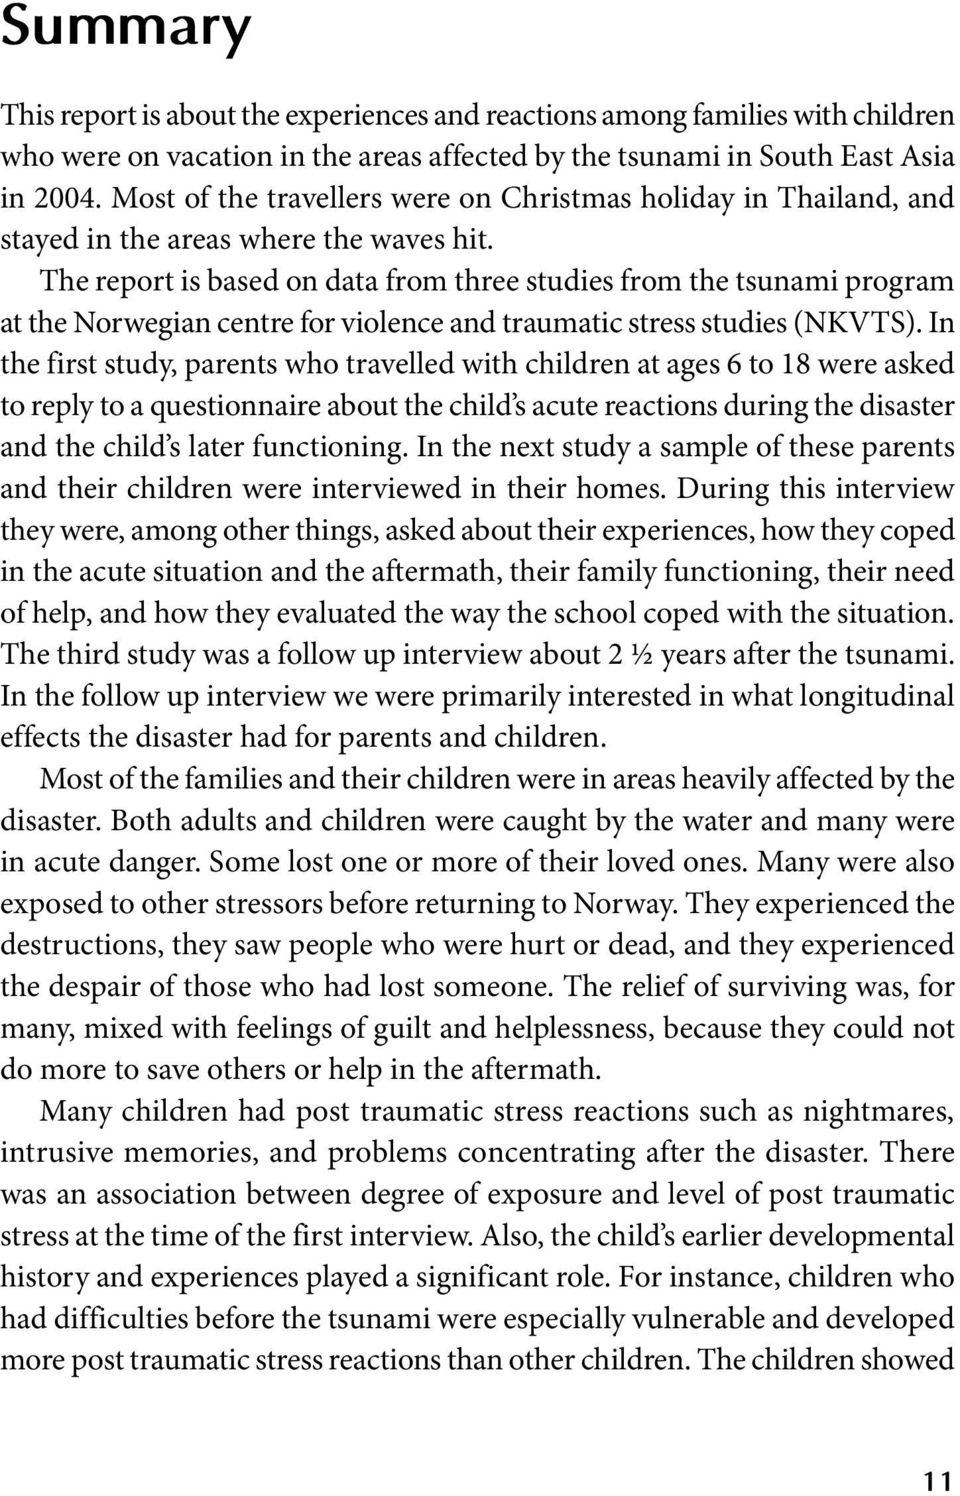 The report is based on data from three studies from the tsunami program at the Norwegian centre for violence and traumatic stress studies (NKVTS).